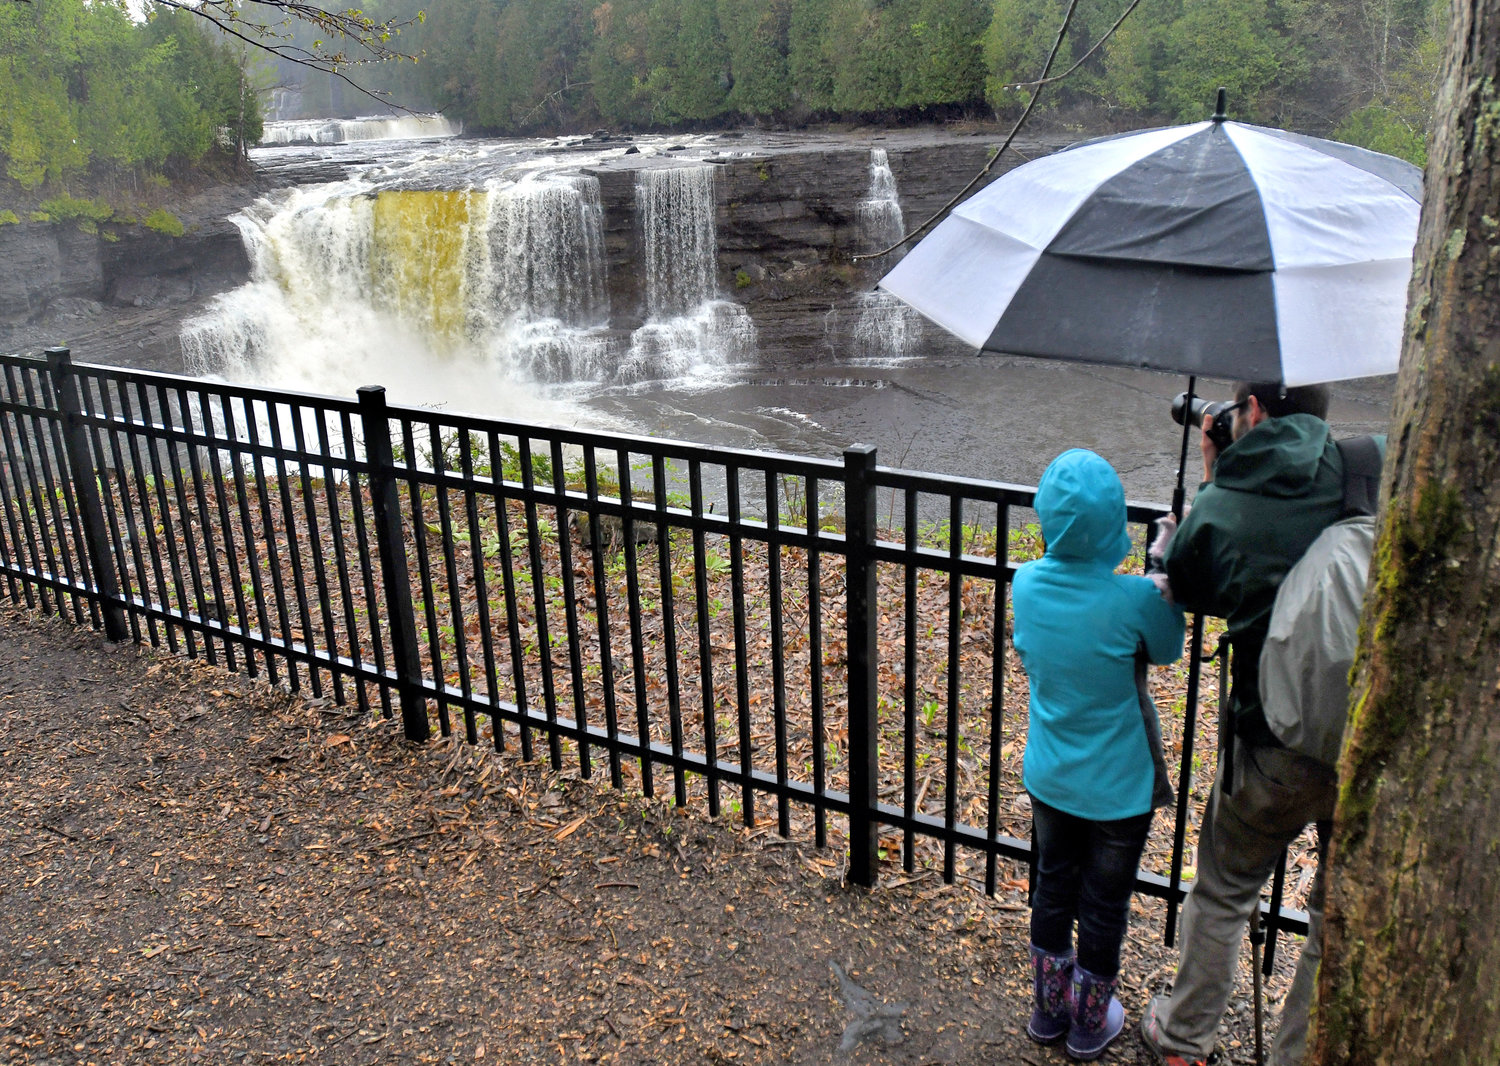 Josh Ostrouch and his wife Melinda Ostrouch from Syracuse take advantage of the Trenton Falls Scenic Trail for a good photo op of the Upper Falls.